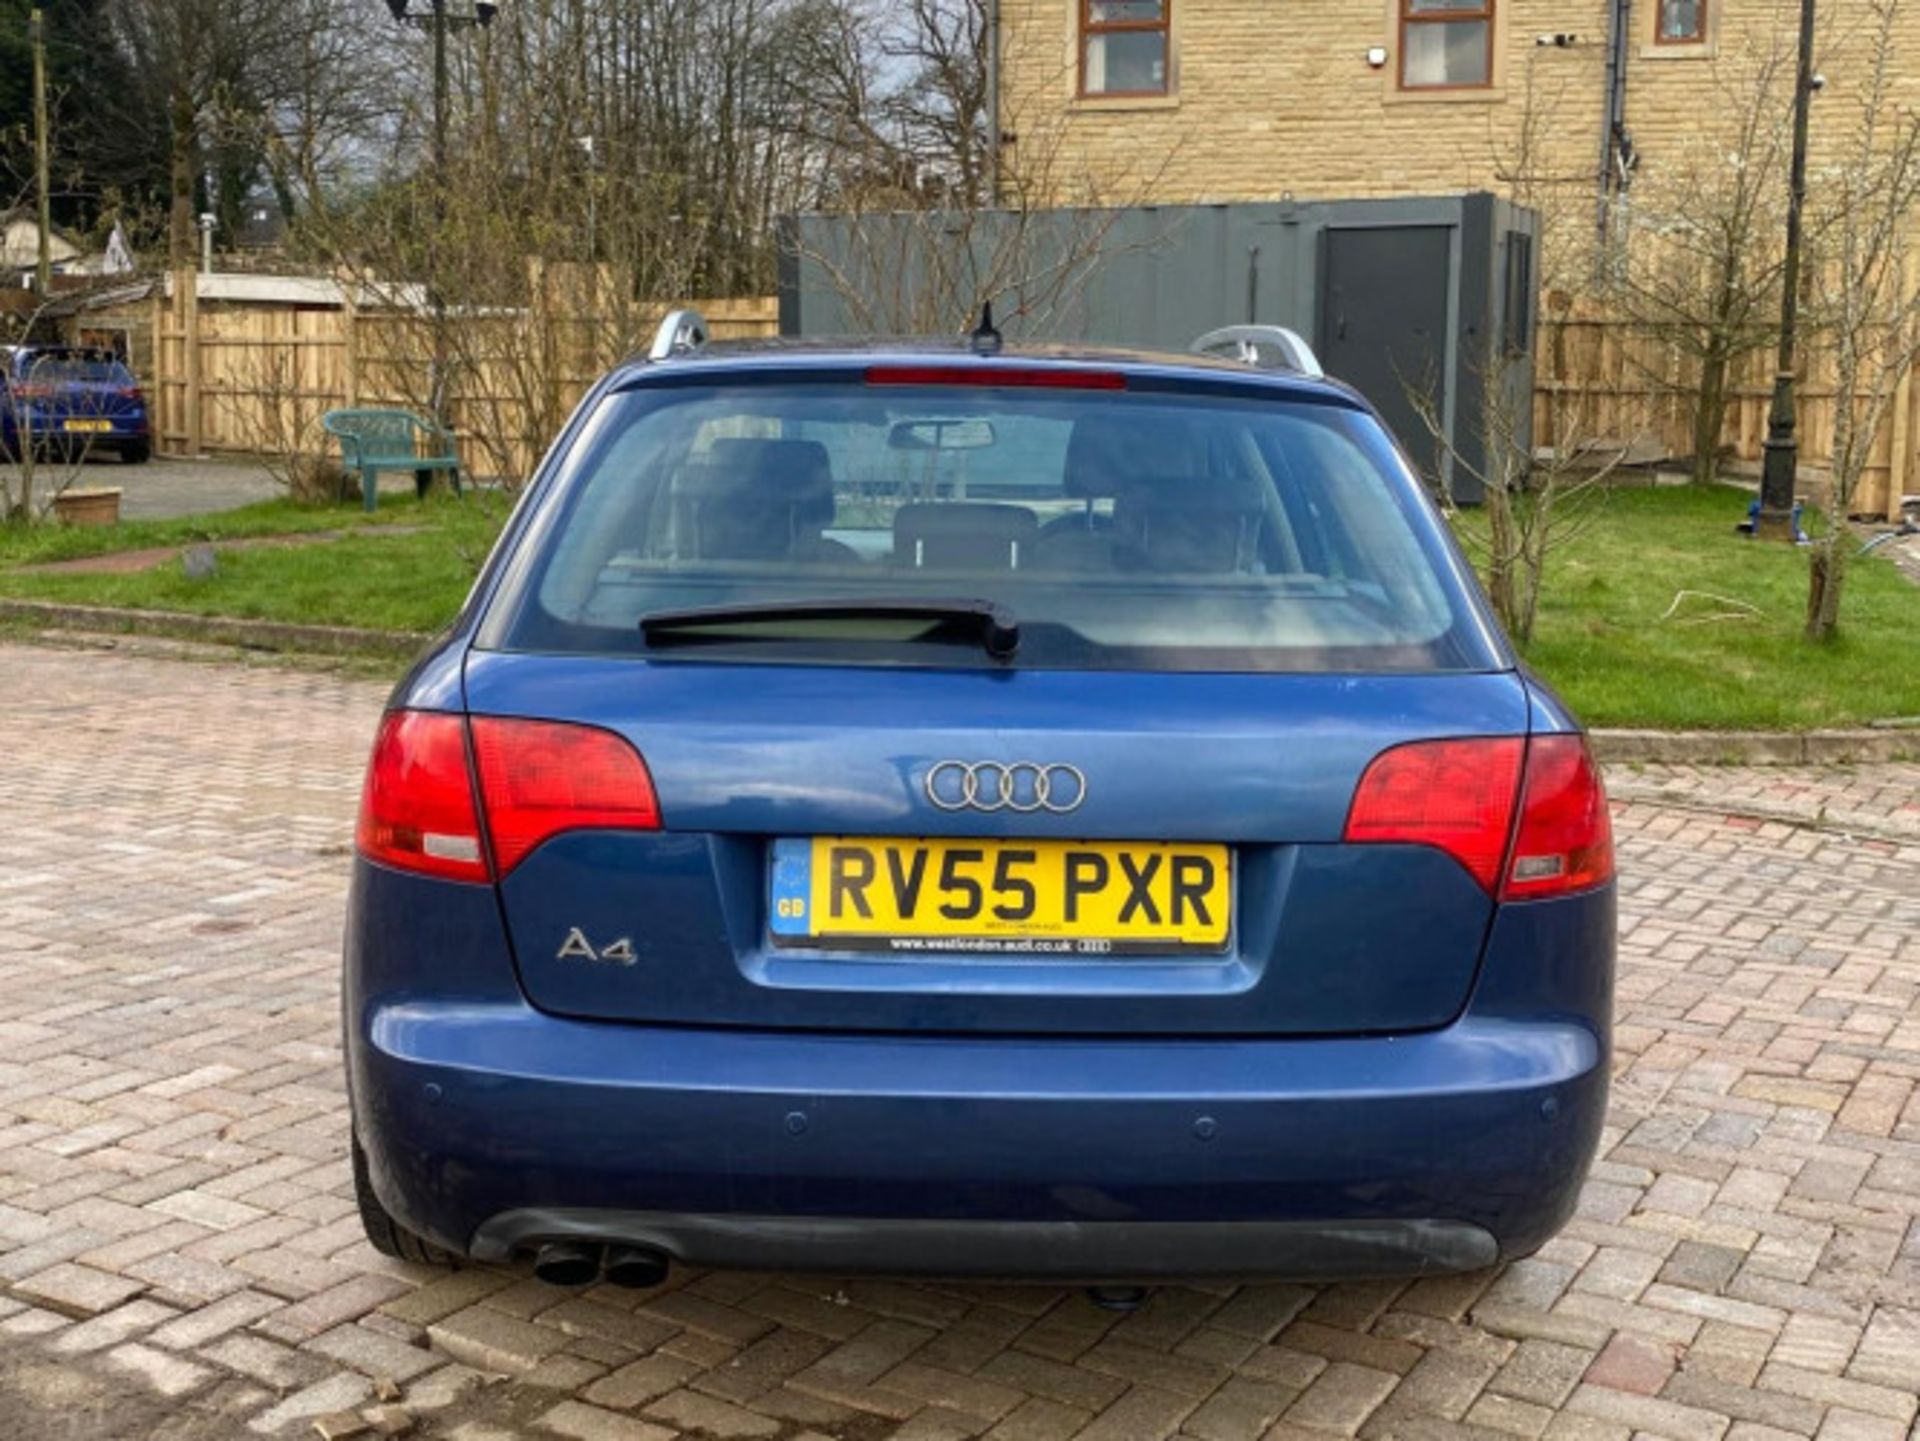 AUDI A4 AVANT 1.9 TDI SE 5DR ESTATE - RARE AND RELIABLE LUXURY WAGON >>--NO VAT ON HAMMER--<< - Image 57 of 63